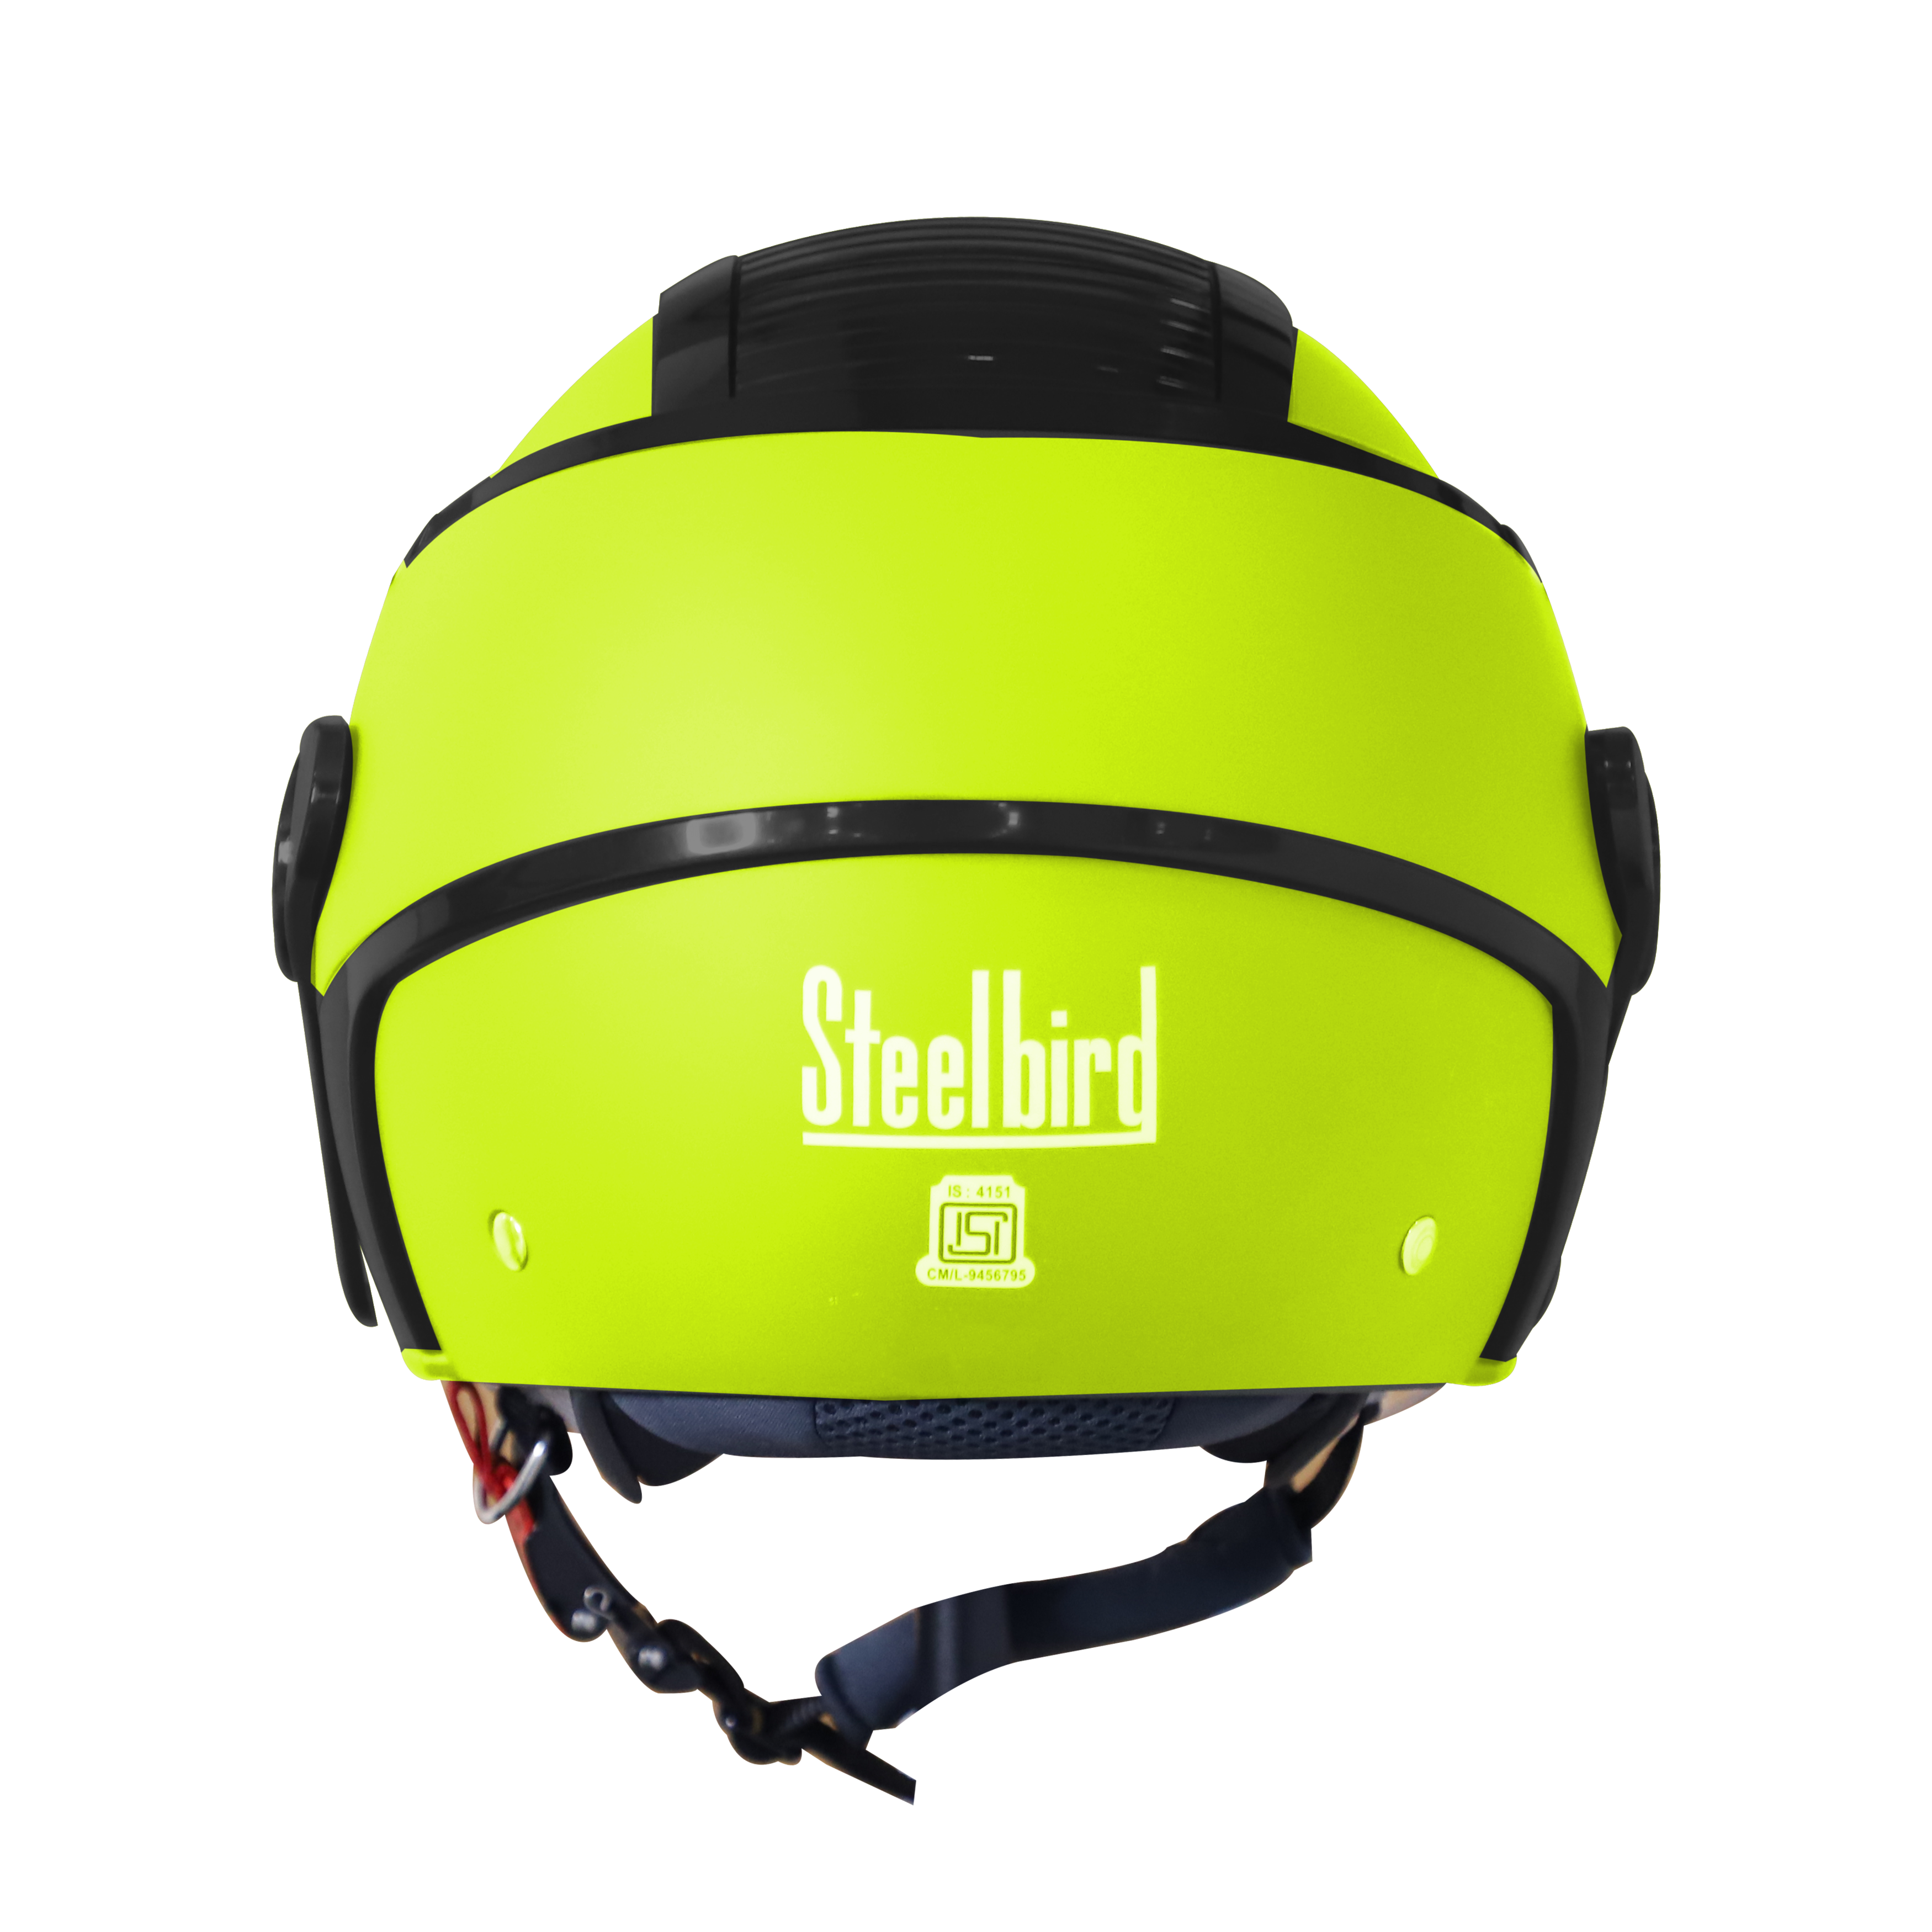 SB-29 AER GLOSSY FLUO NEON WITH BLACK ( FITTED WITH CLEAR VISOR WITH EXTRA SMOKE VISOR FREE)